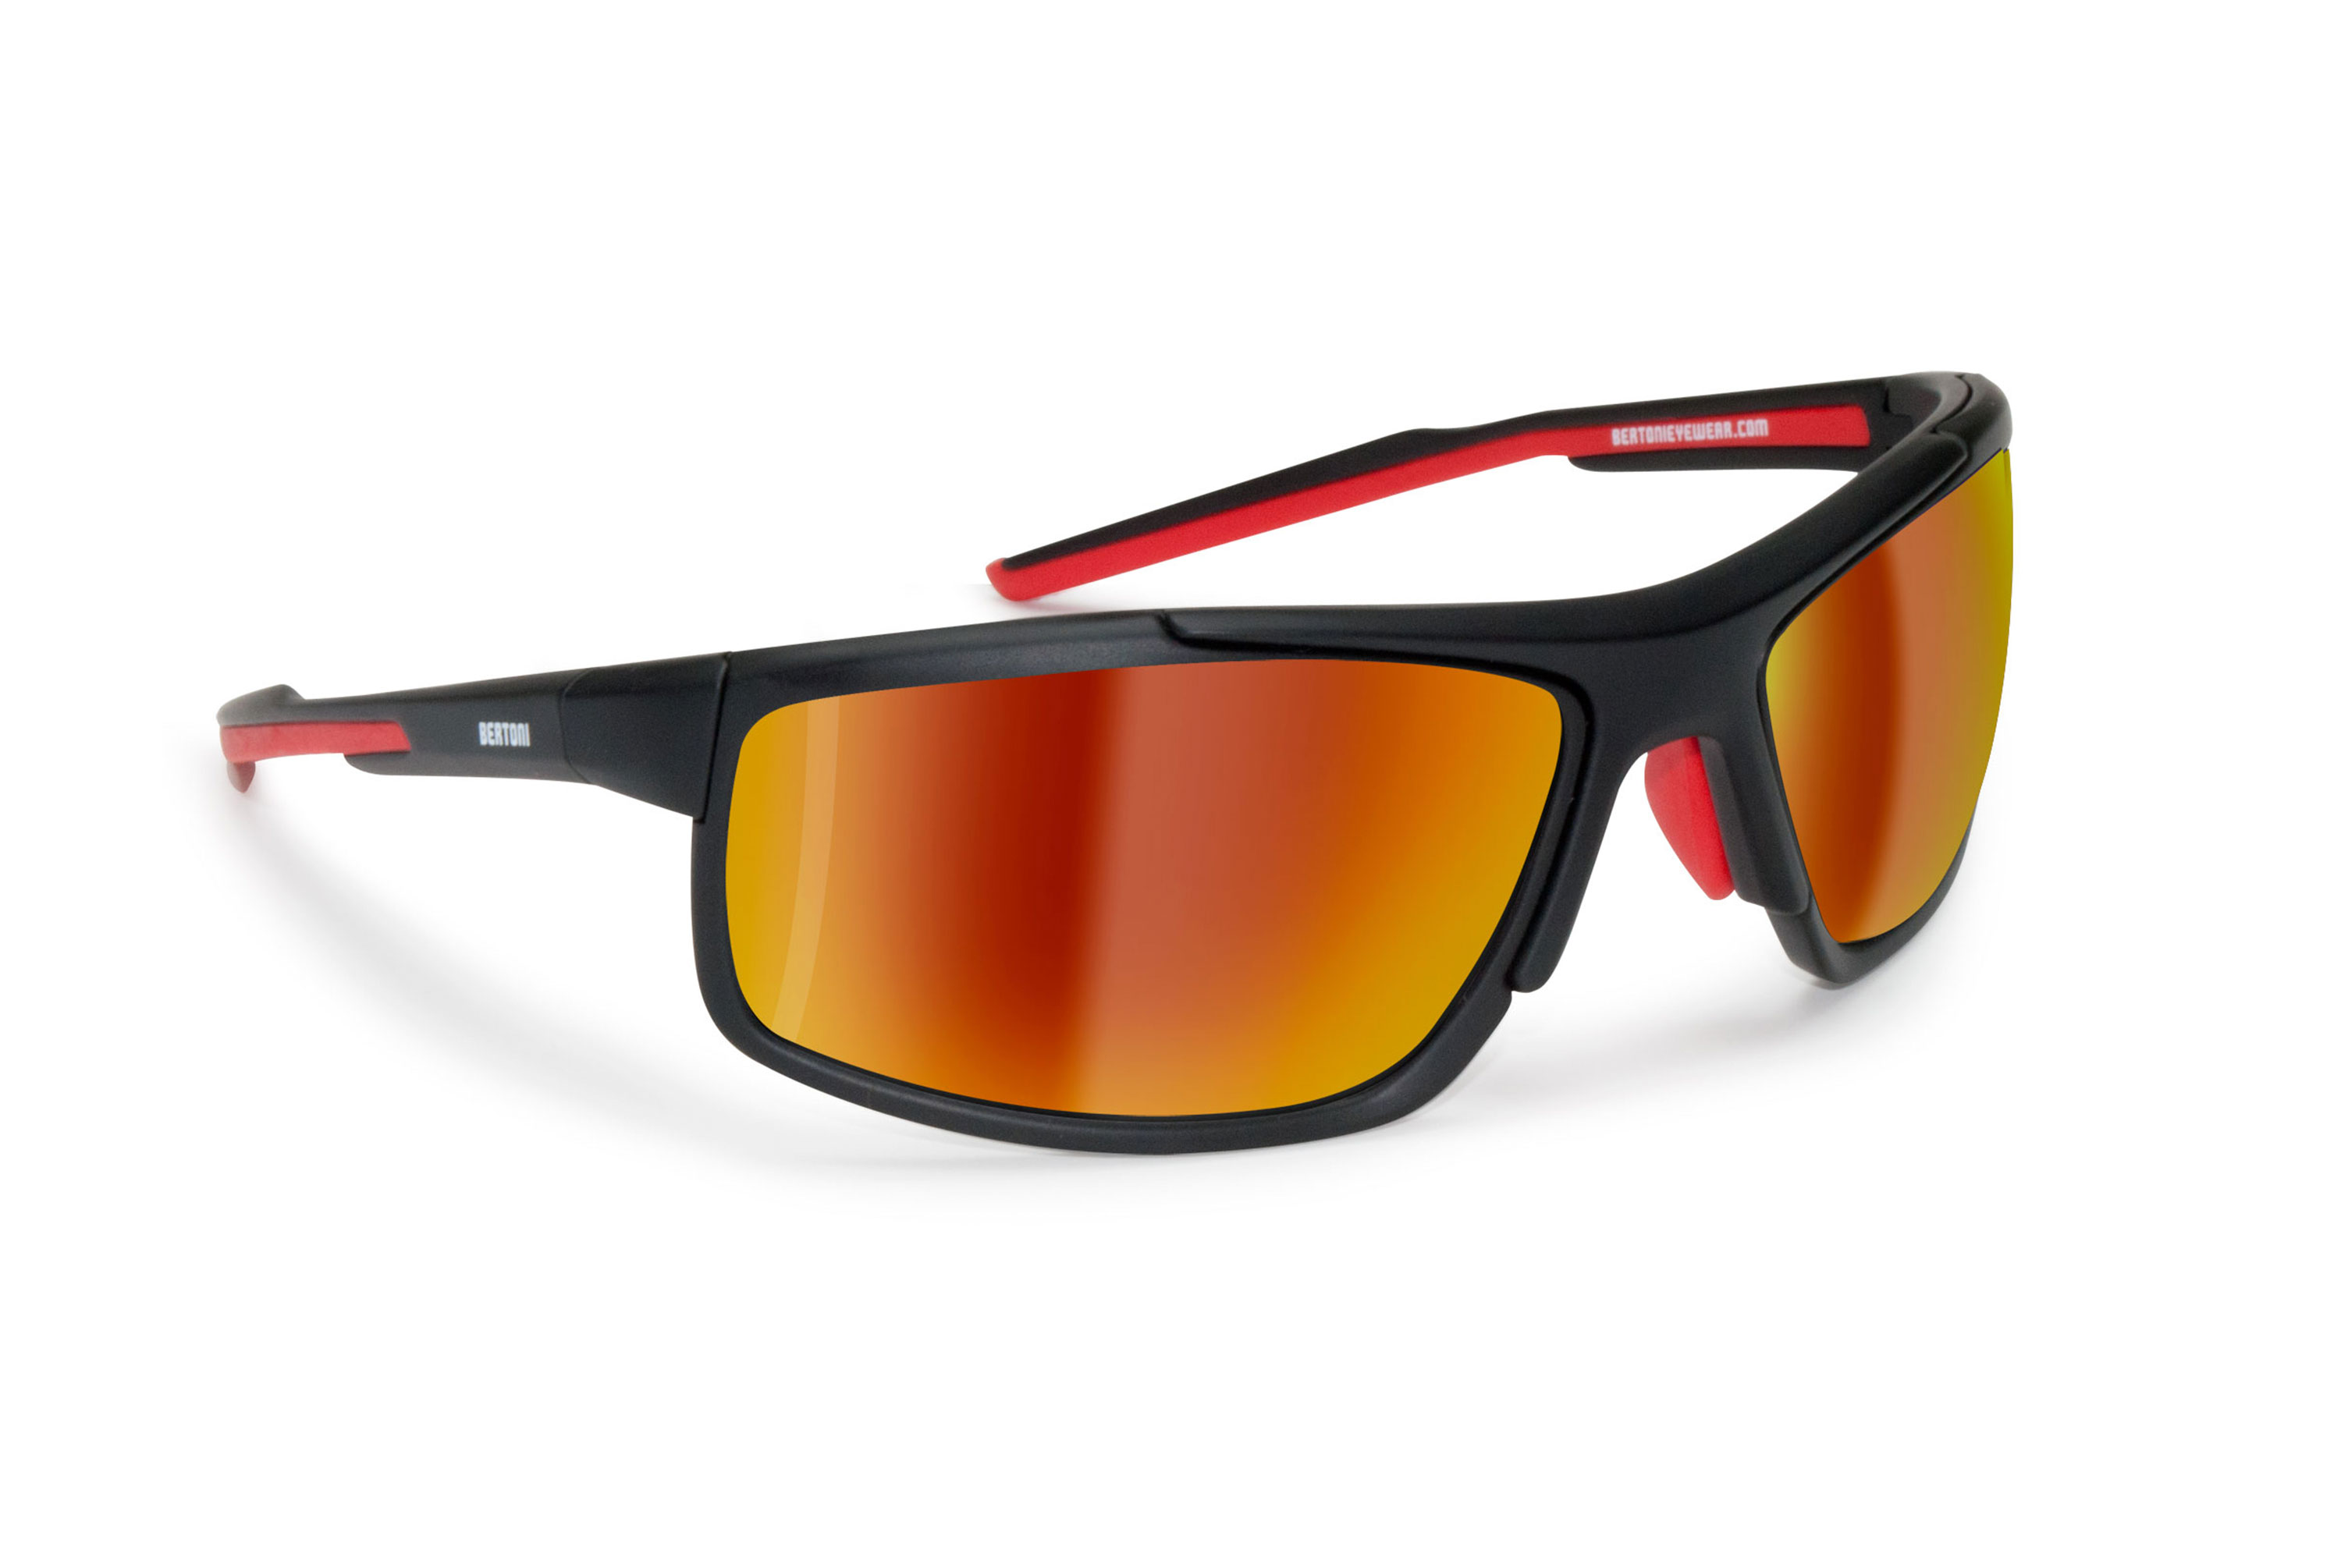 D180 Multilens Interchangeable Sunglasses for Cycling, golf, running, ski  by Bertoni - YouTube